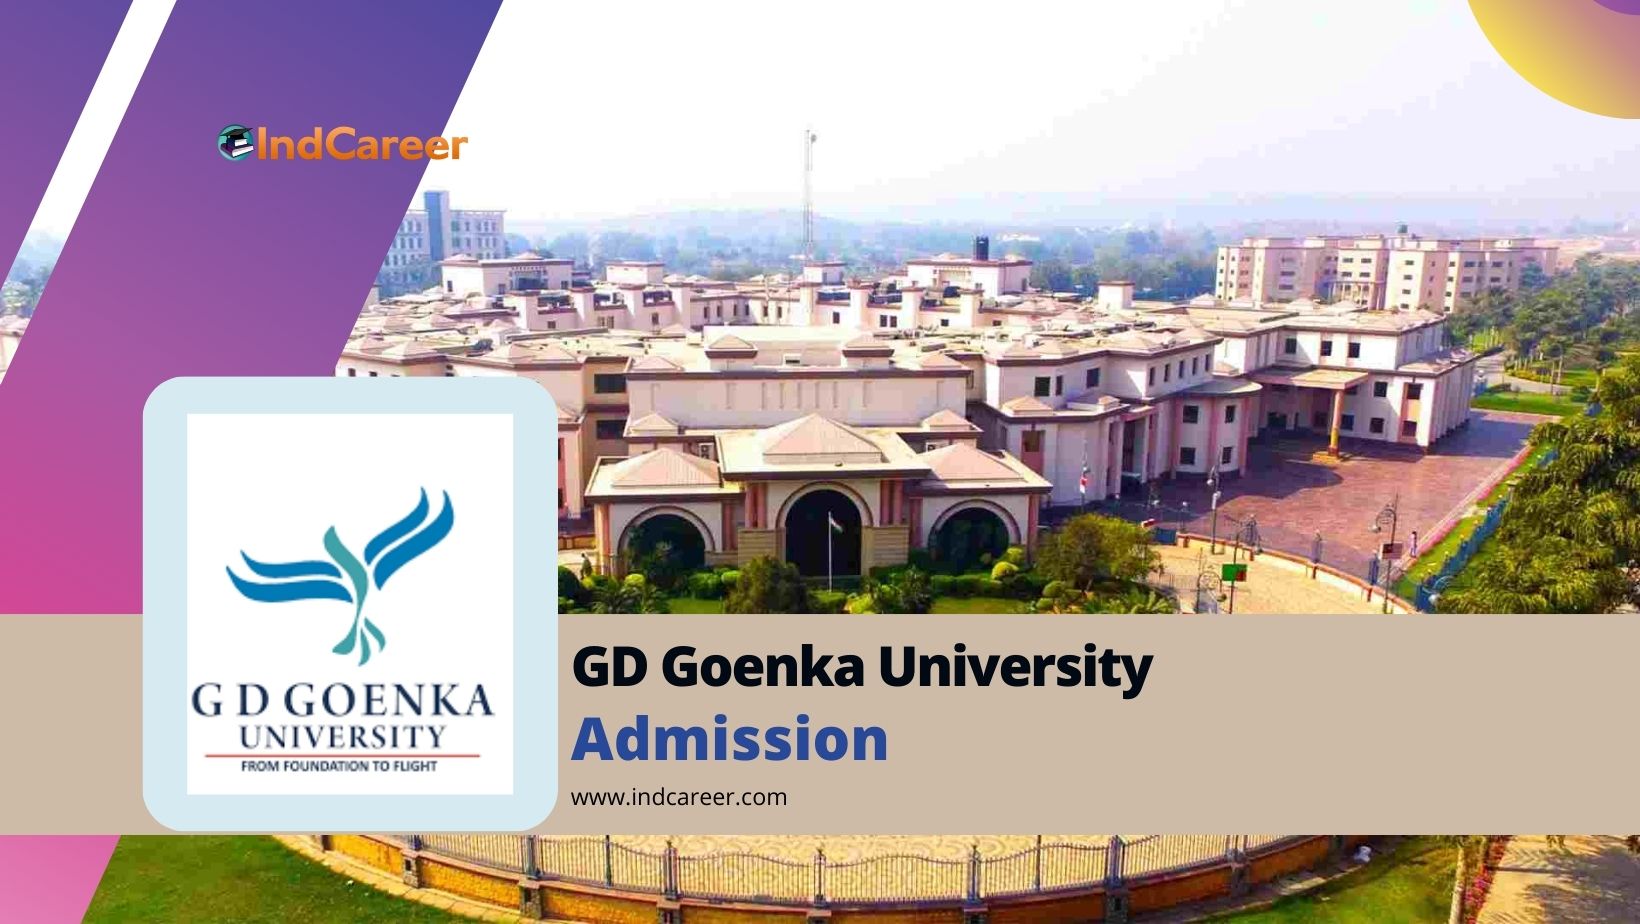 LatestLaws.com Partner Event: G.D. Goenka University organises  International Conference on 'Interdisciplinary Aspects of Law and  Technology' on 28th and 29th Dec, 2021; Submit Abstract By: 7th Nov!